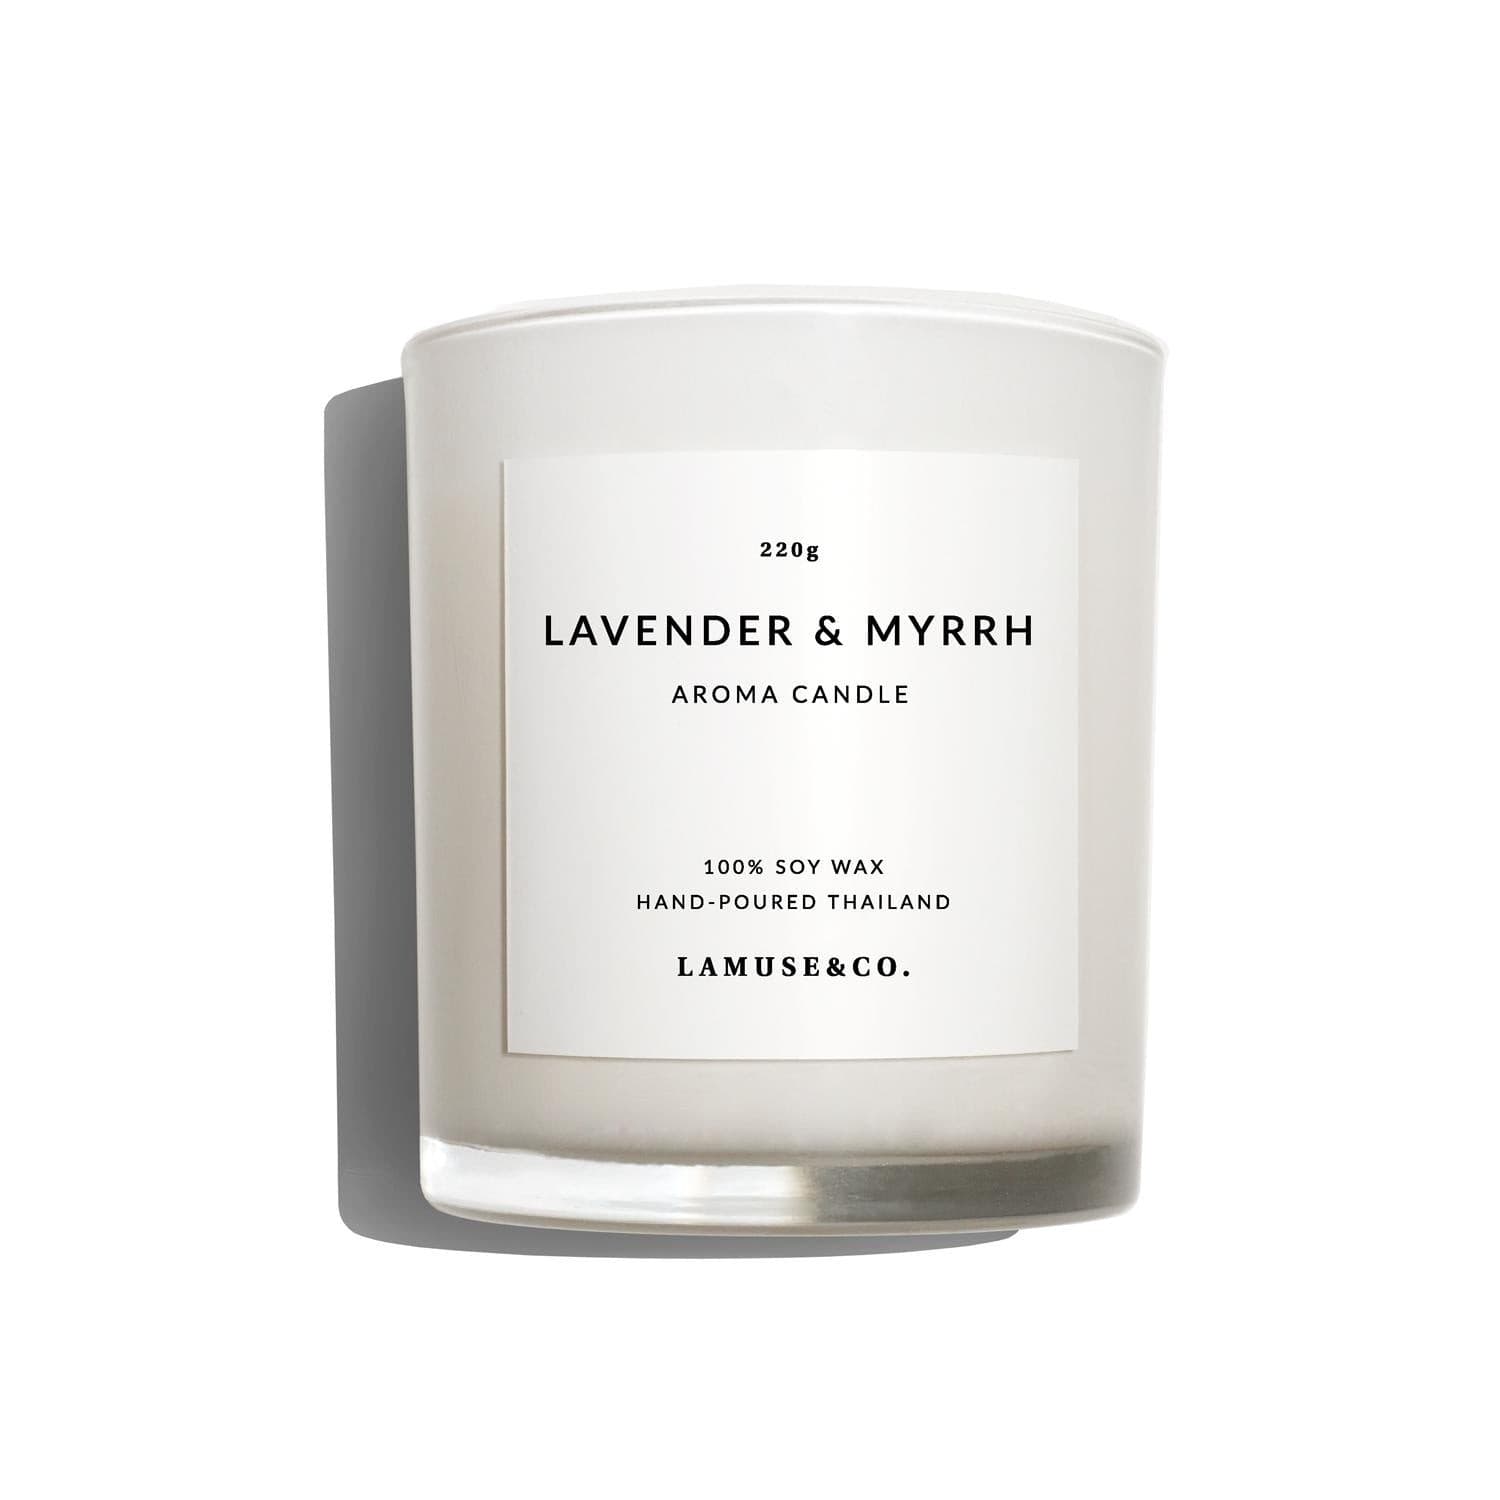 Lavender & Myrrh Aroma Candle 220g scented candle.